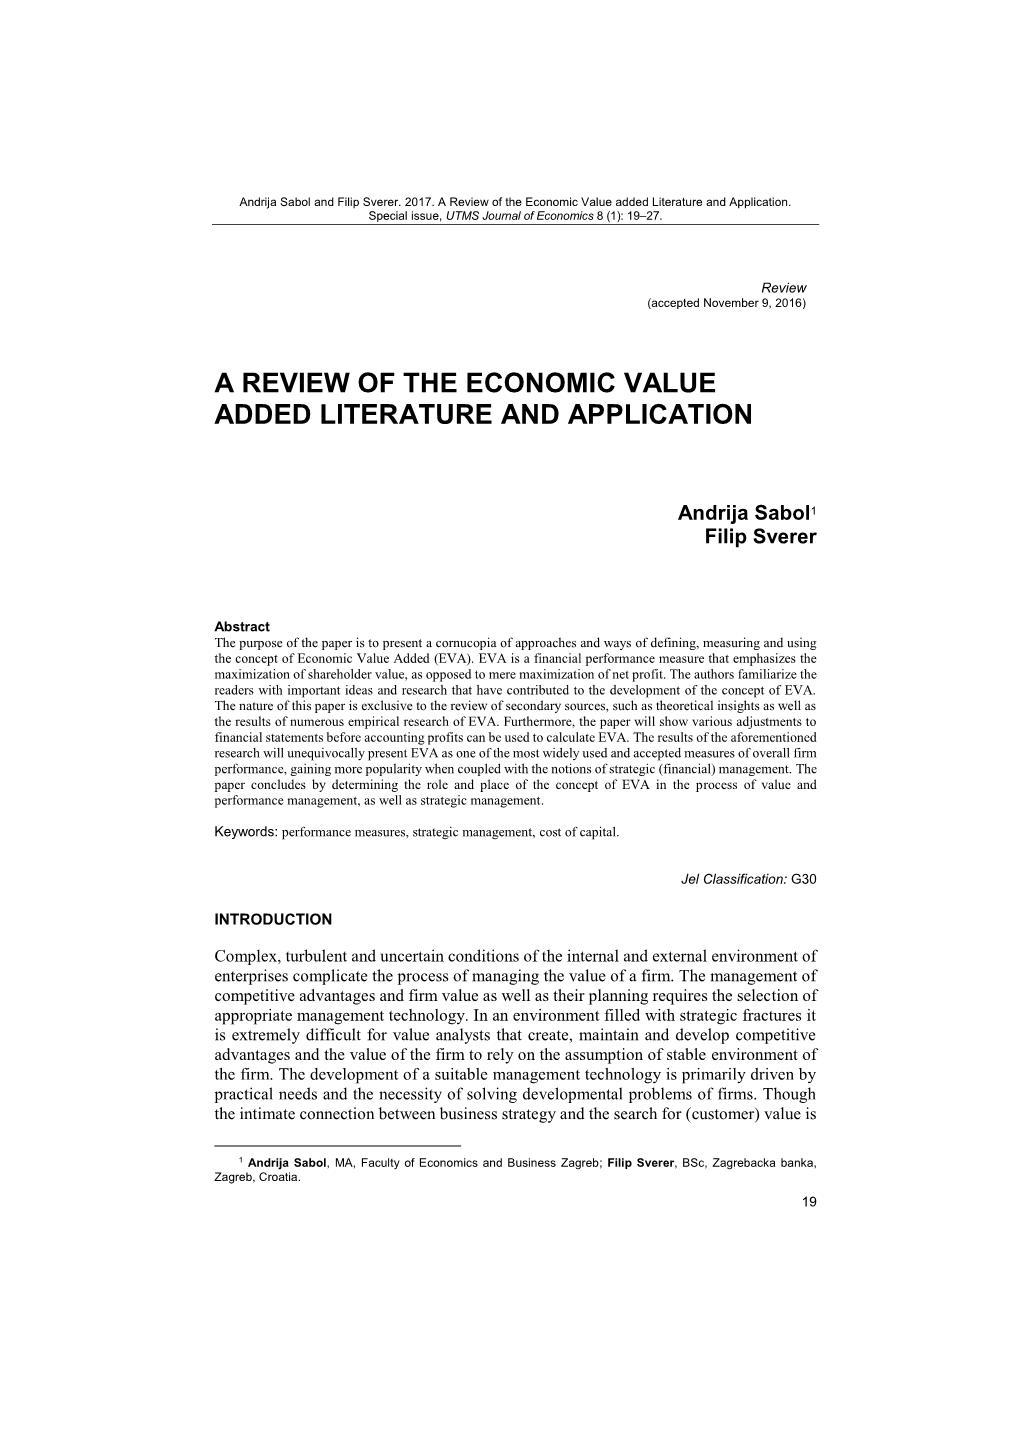 A Review of the Economic Value Added Literature and Application